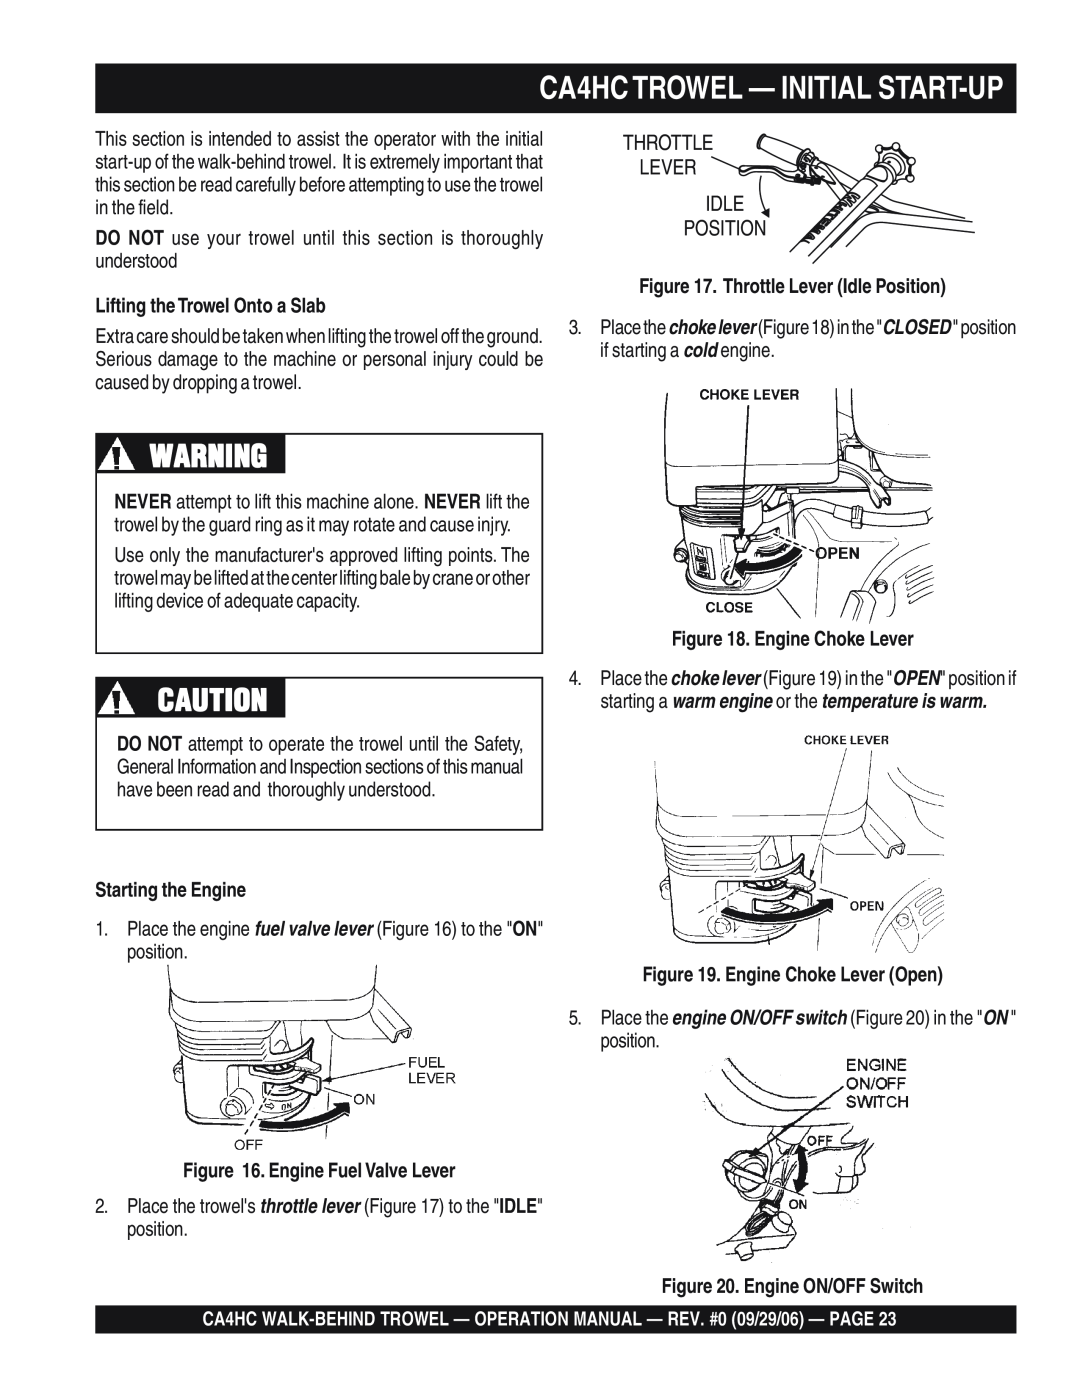 Multiquip operation manual CA4HCTROWEL - INITIAL START-UP, Throttle Lever Idle Position, Lifting the Trowel Onto a Slab 